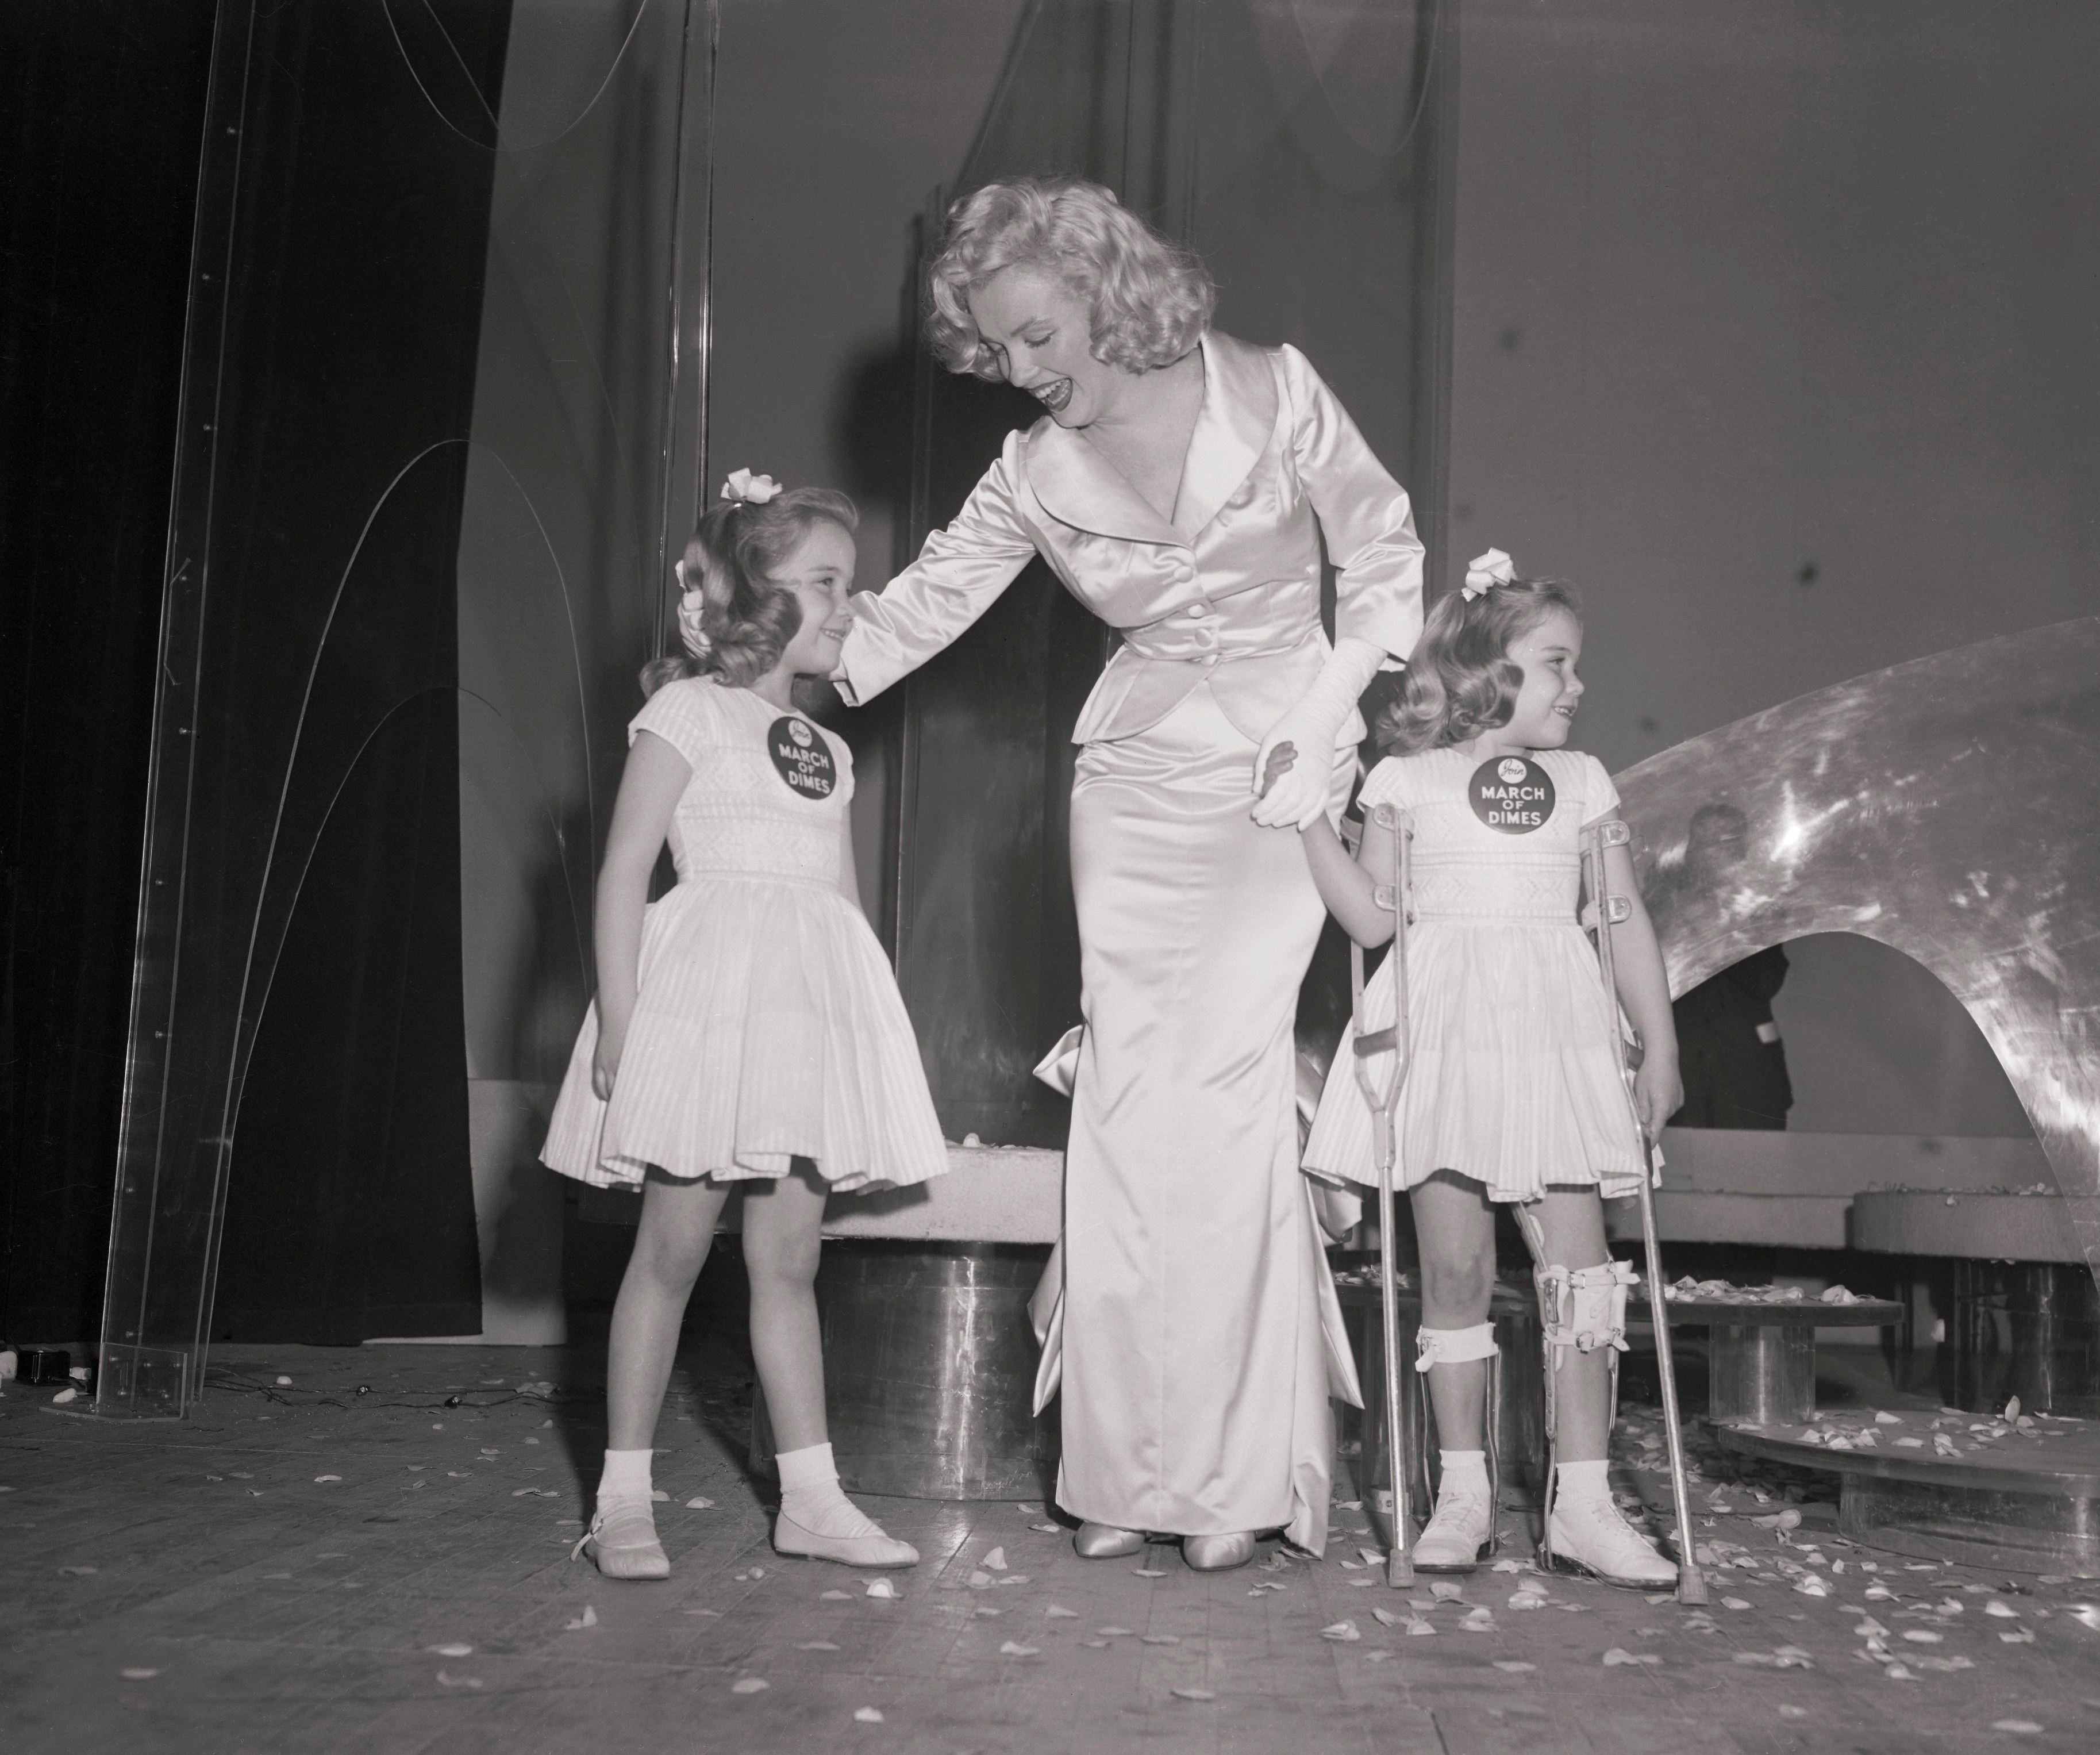 Monroe with twin girls at the March of Dimes fashion show in 1958.